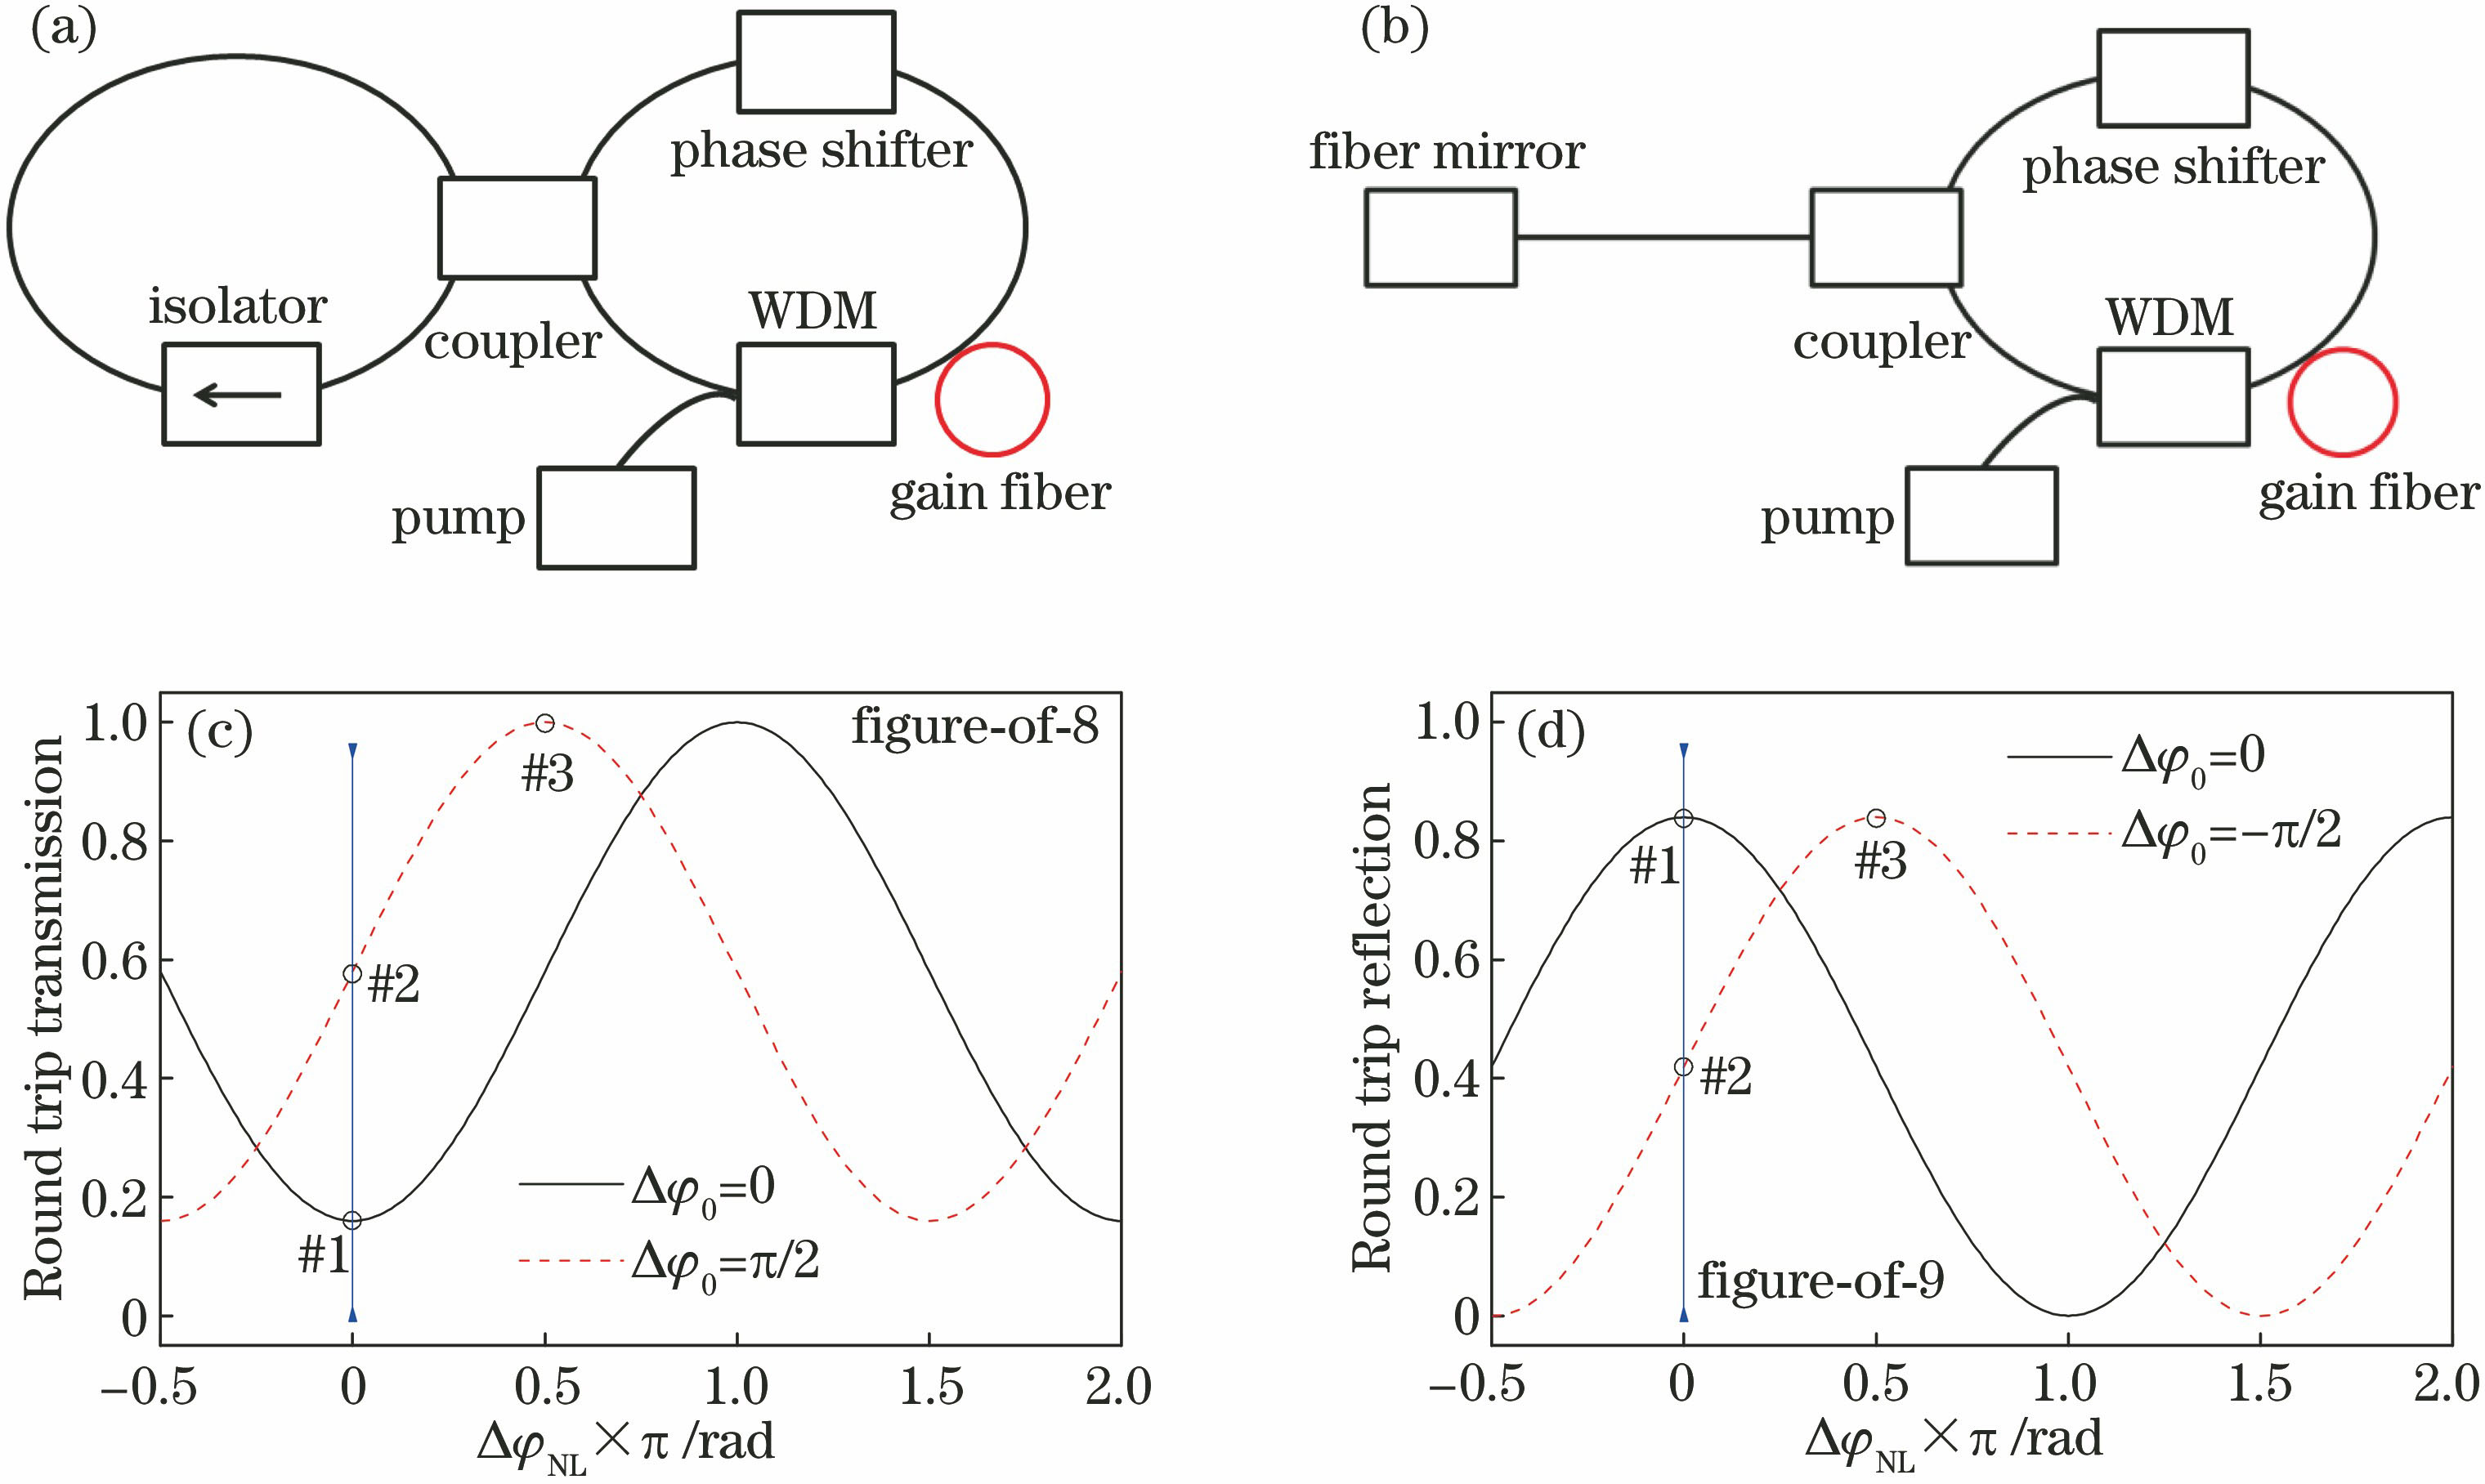 Schematics of figure-of-8 and figure-of-9 cavities. (a) Schematic of figure-of-8 mode-locked fiber laser; (b) schematic of figure-of-9 mode-locked fiber laser; (c) calculated round trip transmission through NOLM/NALM device as function of nonlinear phase difference in loop (corresponding to figure-of-8 cavity); (d) calculated round trip reflection through NOLM/NALM device as function of nonlinear phase difference in loop (corresponding to figure-of-9 cavity)